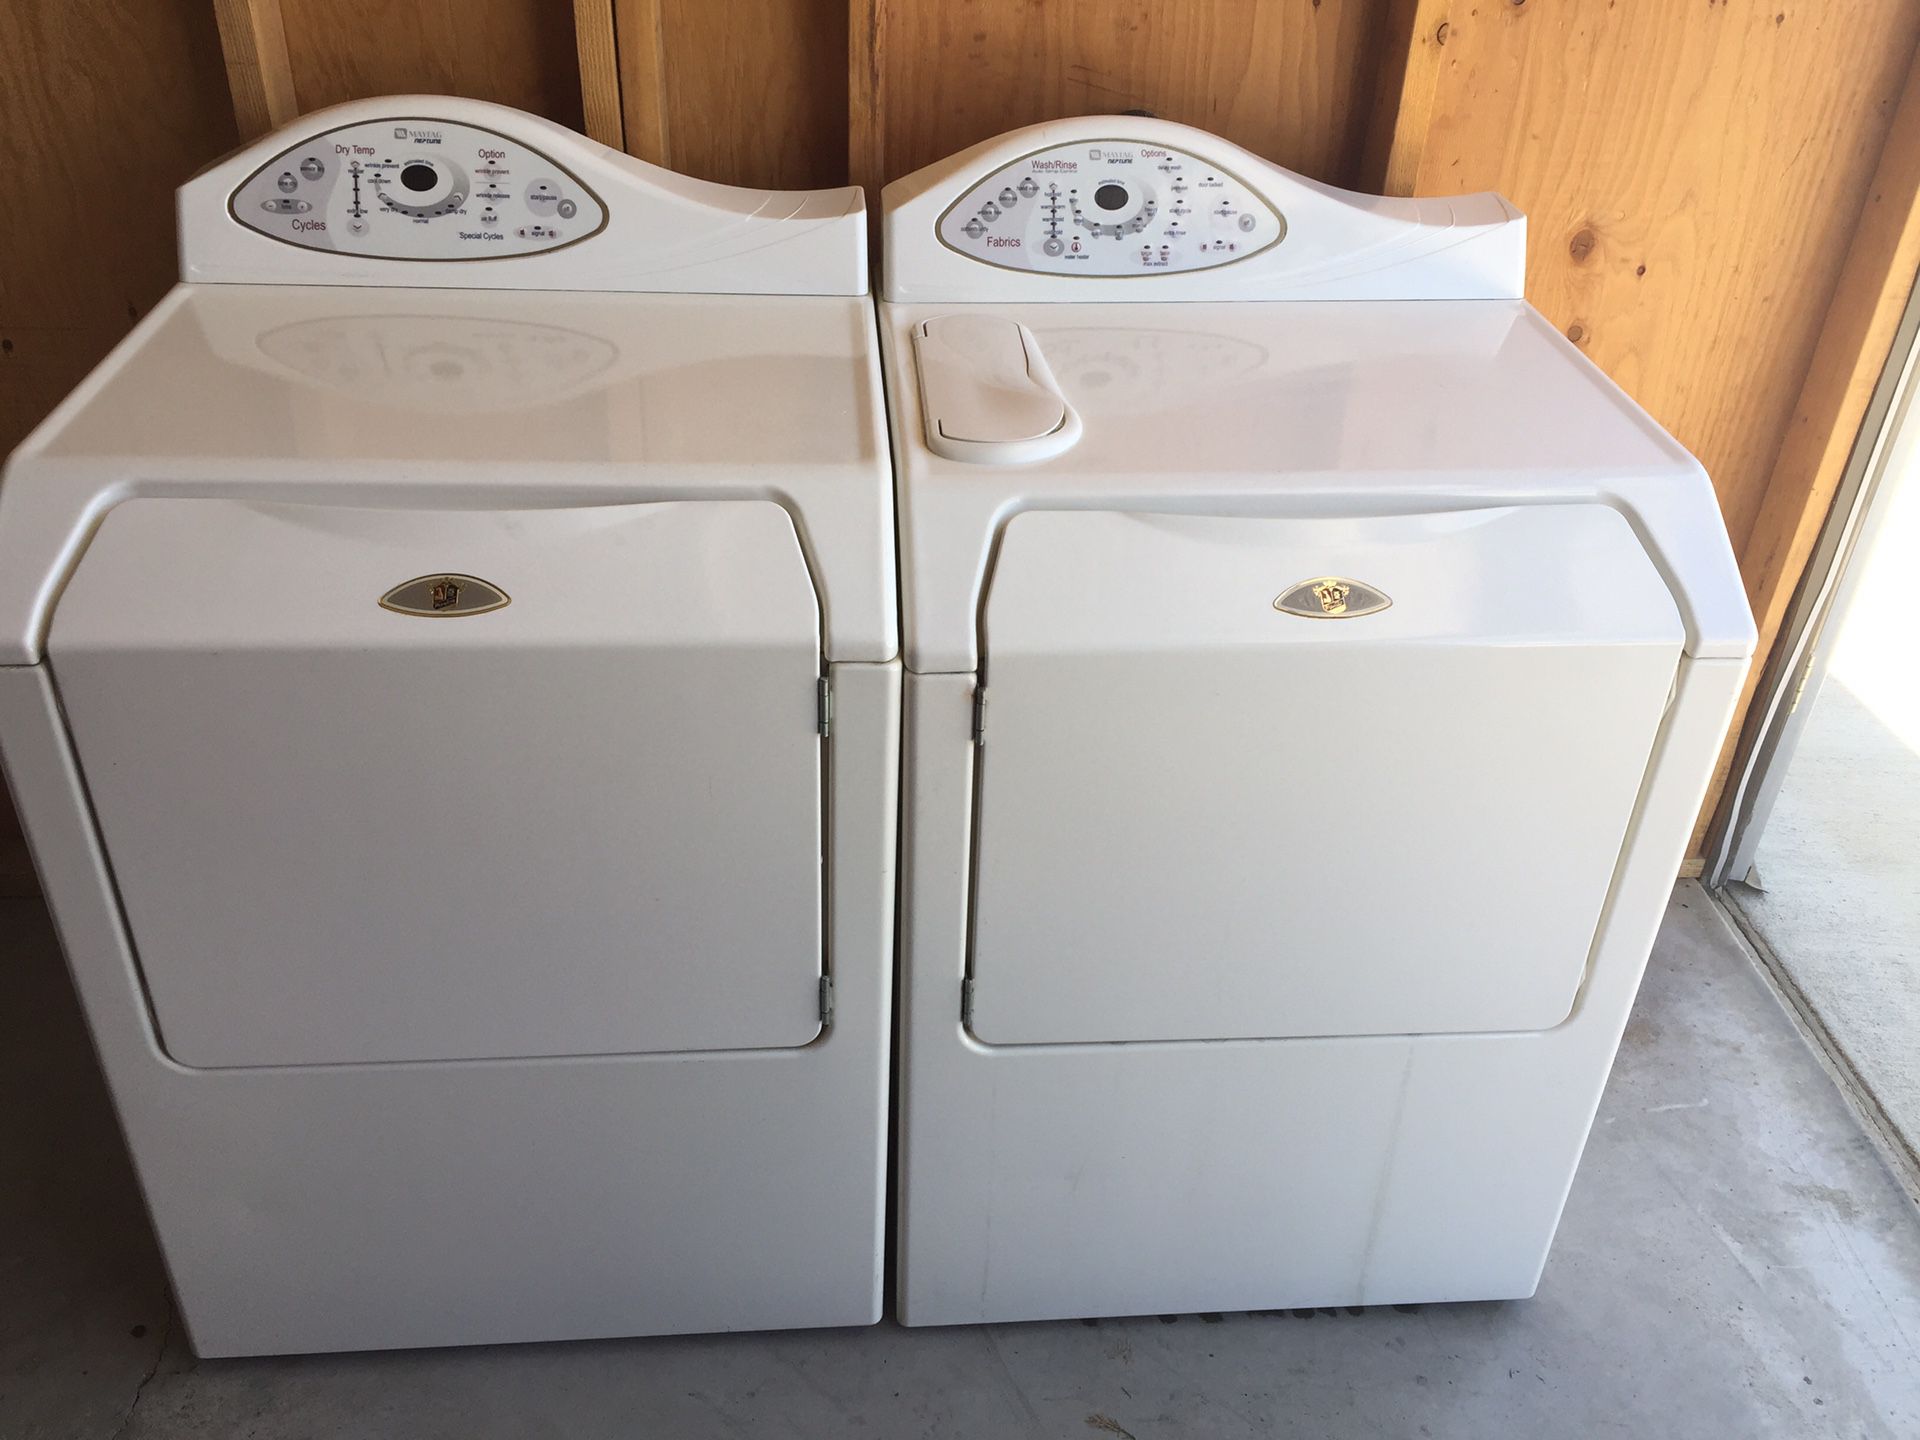 Maytag Neptune frontload washer and gas dryer